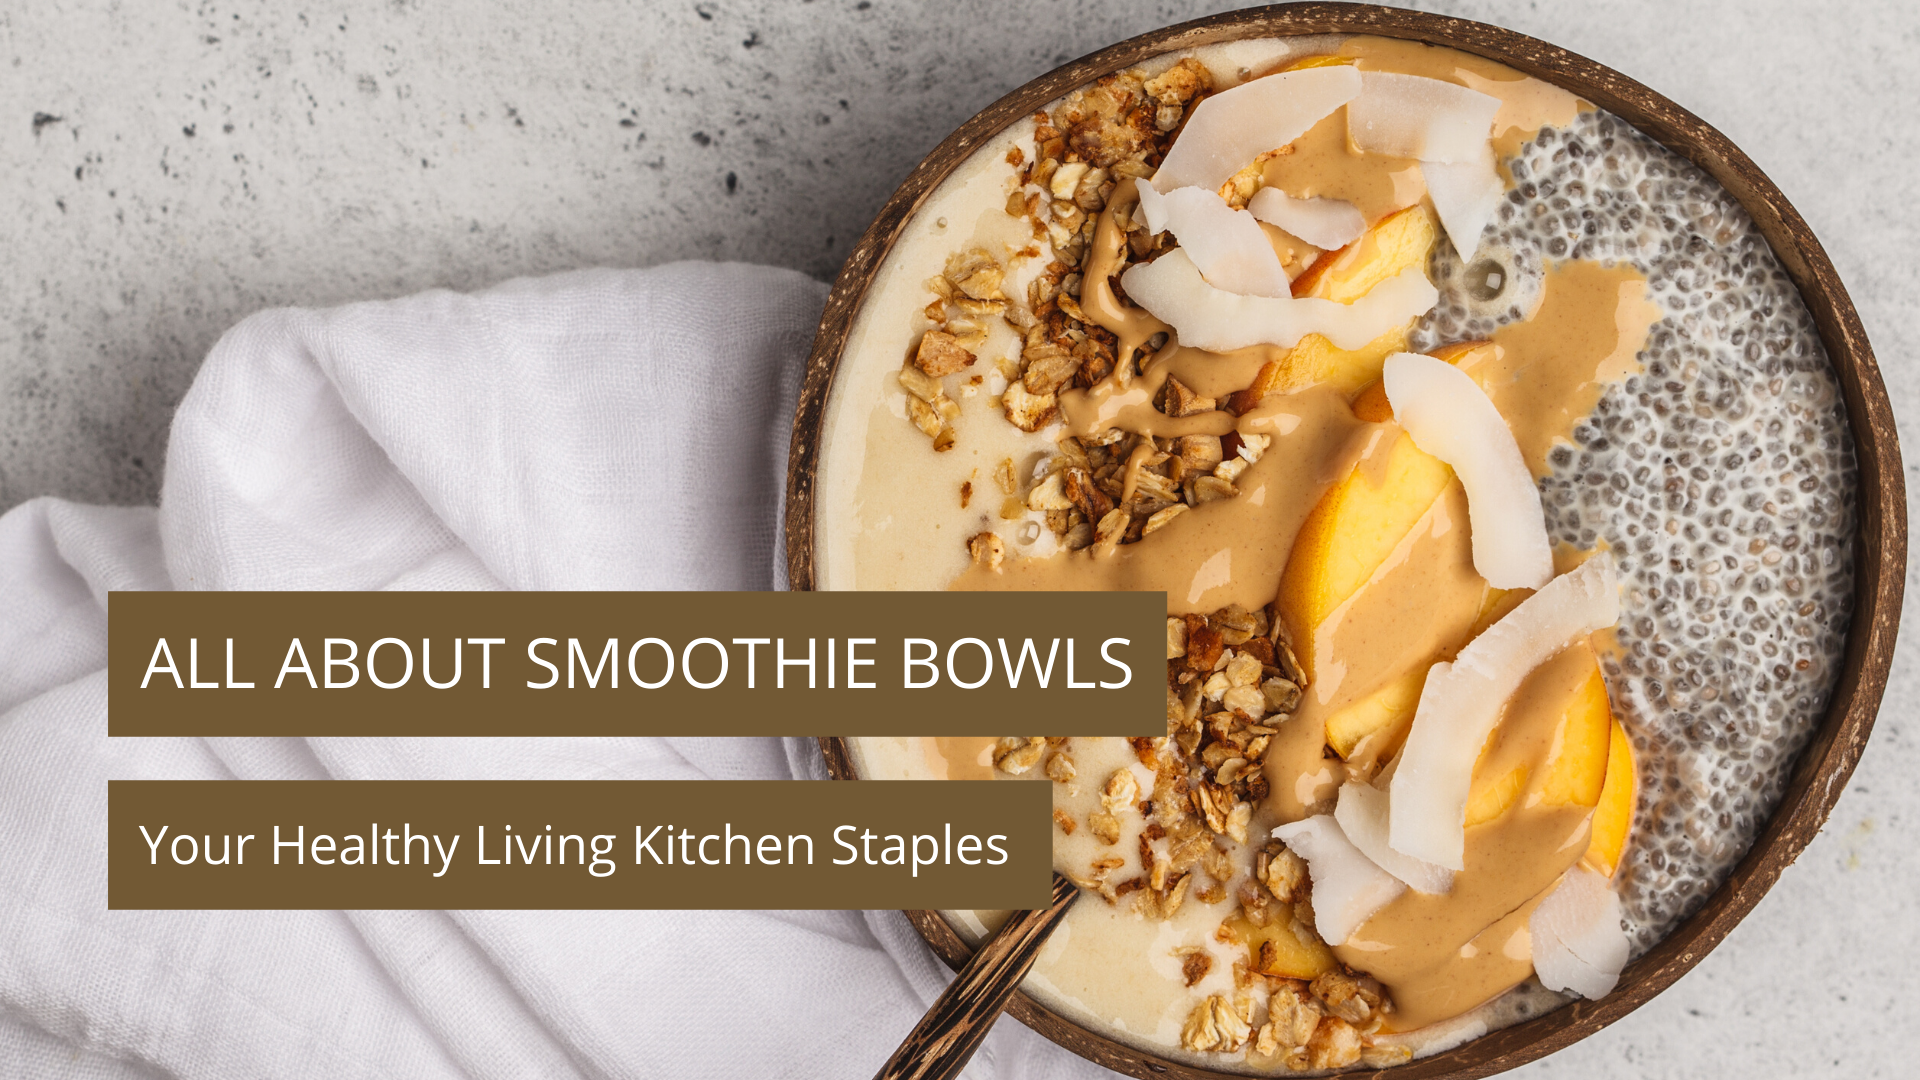 http://rainforestbowls.com/cdn/shop/articles/All_About_Smoothie_Bowls.png?v=1592526921